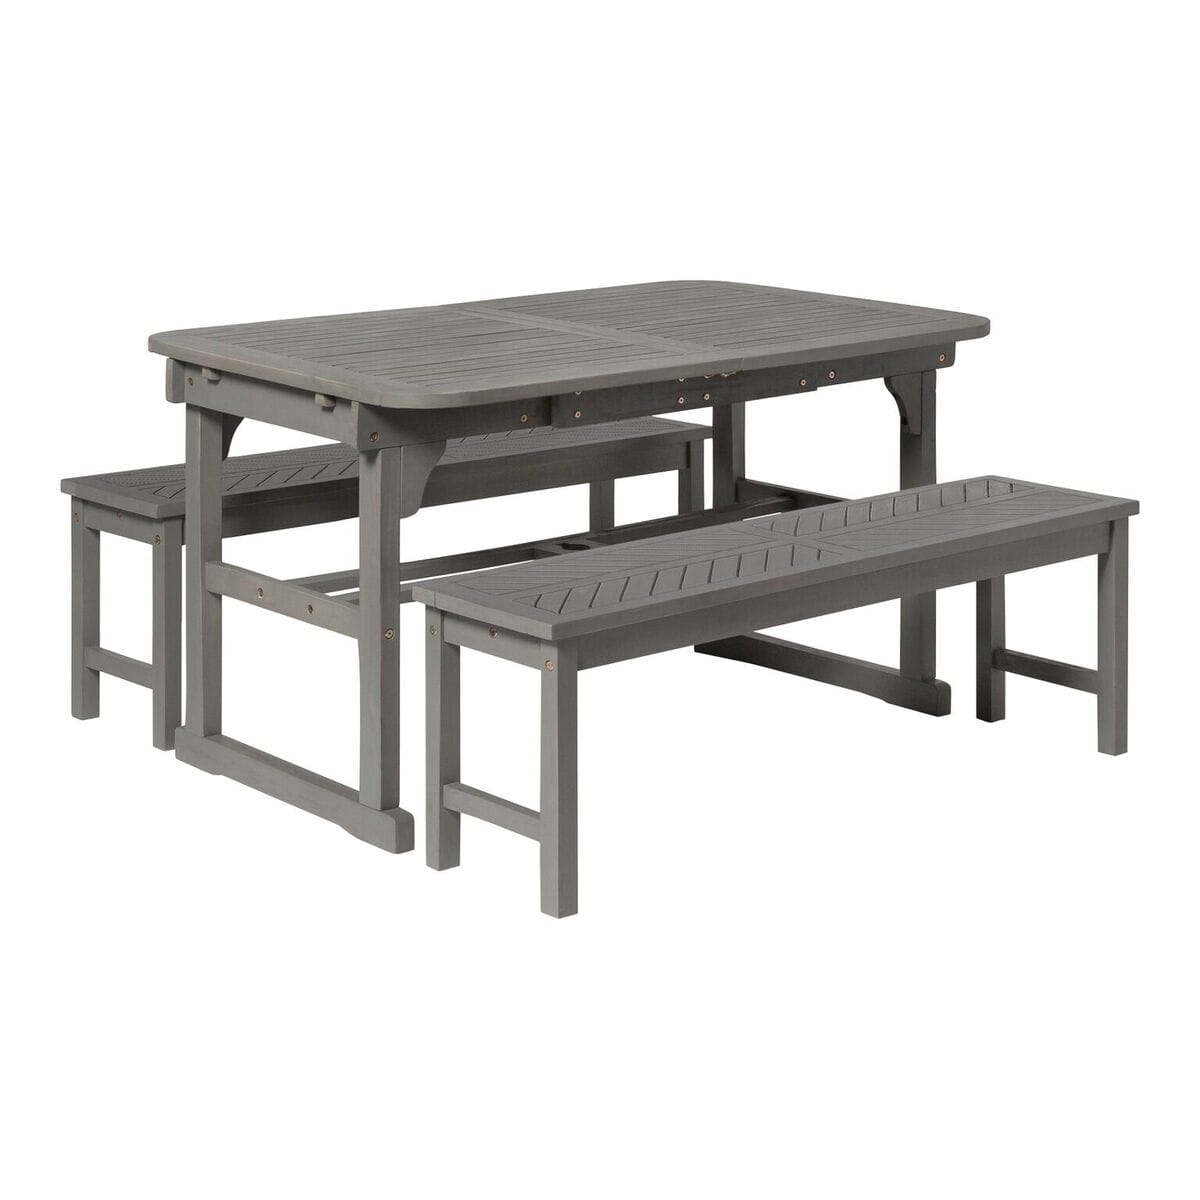 Featured image of post Expandable Outdoor Dining Table : Christopher knight home exuma outdoor expandable cast aluminum rectangular dining table, black.